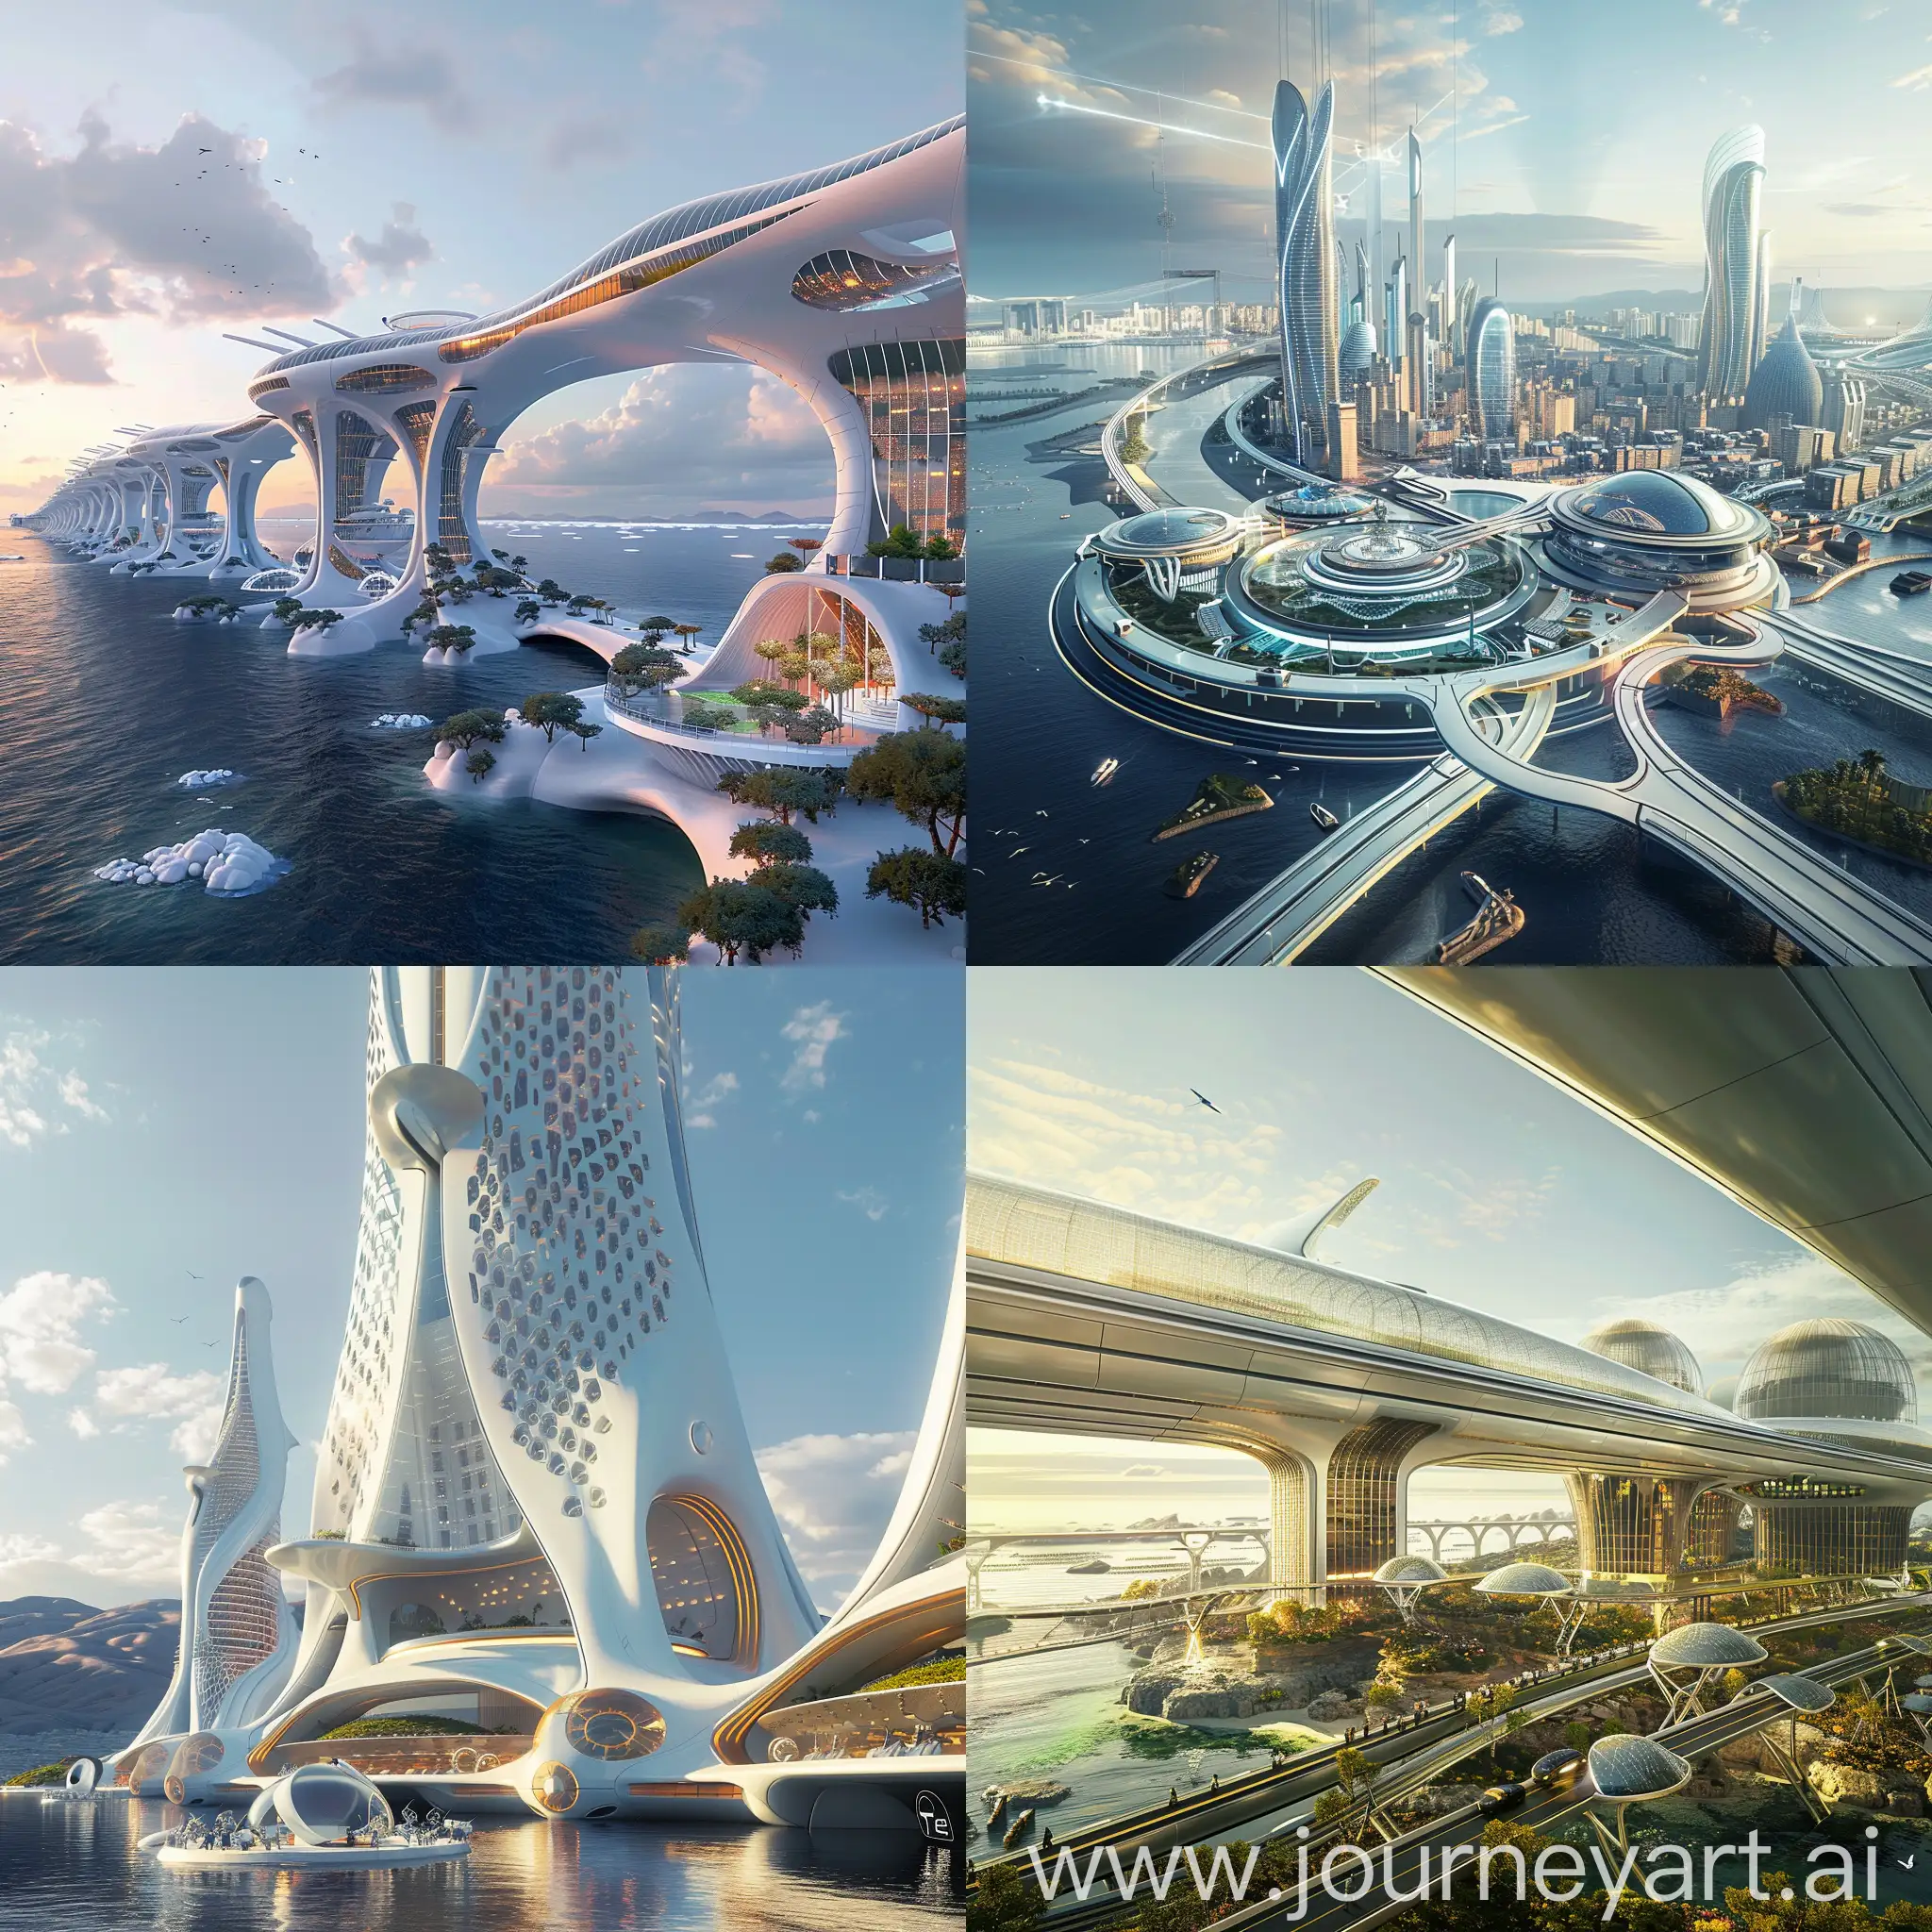 Futuristic Vladivostok, Sustainable Infrastructure (Siemens), Vertical Farms (Panasonic), Hyperloop Transportation (Tesla), Smart Homes (Samsung), Biometric Security (Amazon), Immersive Entertainment (Meta), Underwater Living (SpaceX), Robotic Assistants (Boston Dynamics), Waste-to-Energy Systems (GE), Adaptive Architecture (Microsoft), Kinetic Facades (Apple), Self-Cleaning Surfaces (Daikin), Biomimetic Architecture (Skanska), Urban Skyfarms (AeroFarms), Climate-Adaptive Structures (ARUP), Kinetic Bridges (Dissing + Weitling), Light Pollution Control Systems (Philips), Oceanic Energy Harvesting (Siemens), Hyperloop Stations (Tesla), Public Transportation Pods (Uber), unreal engine 5 --stylize 1000